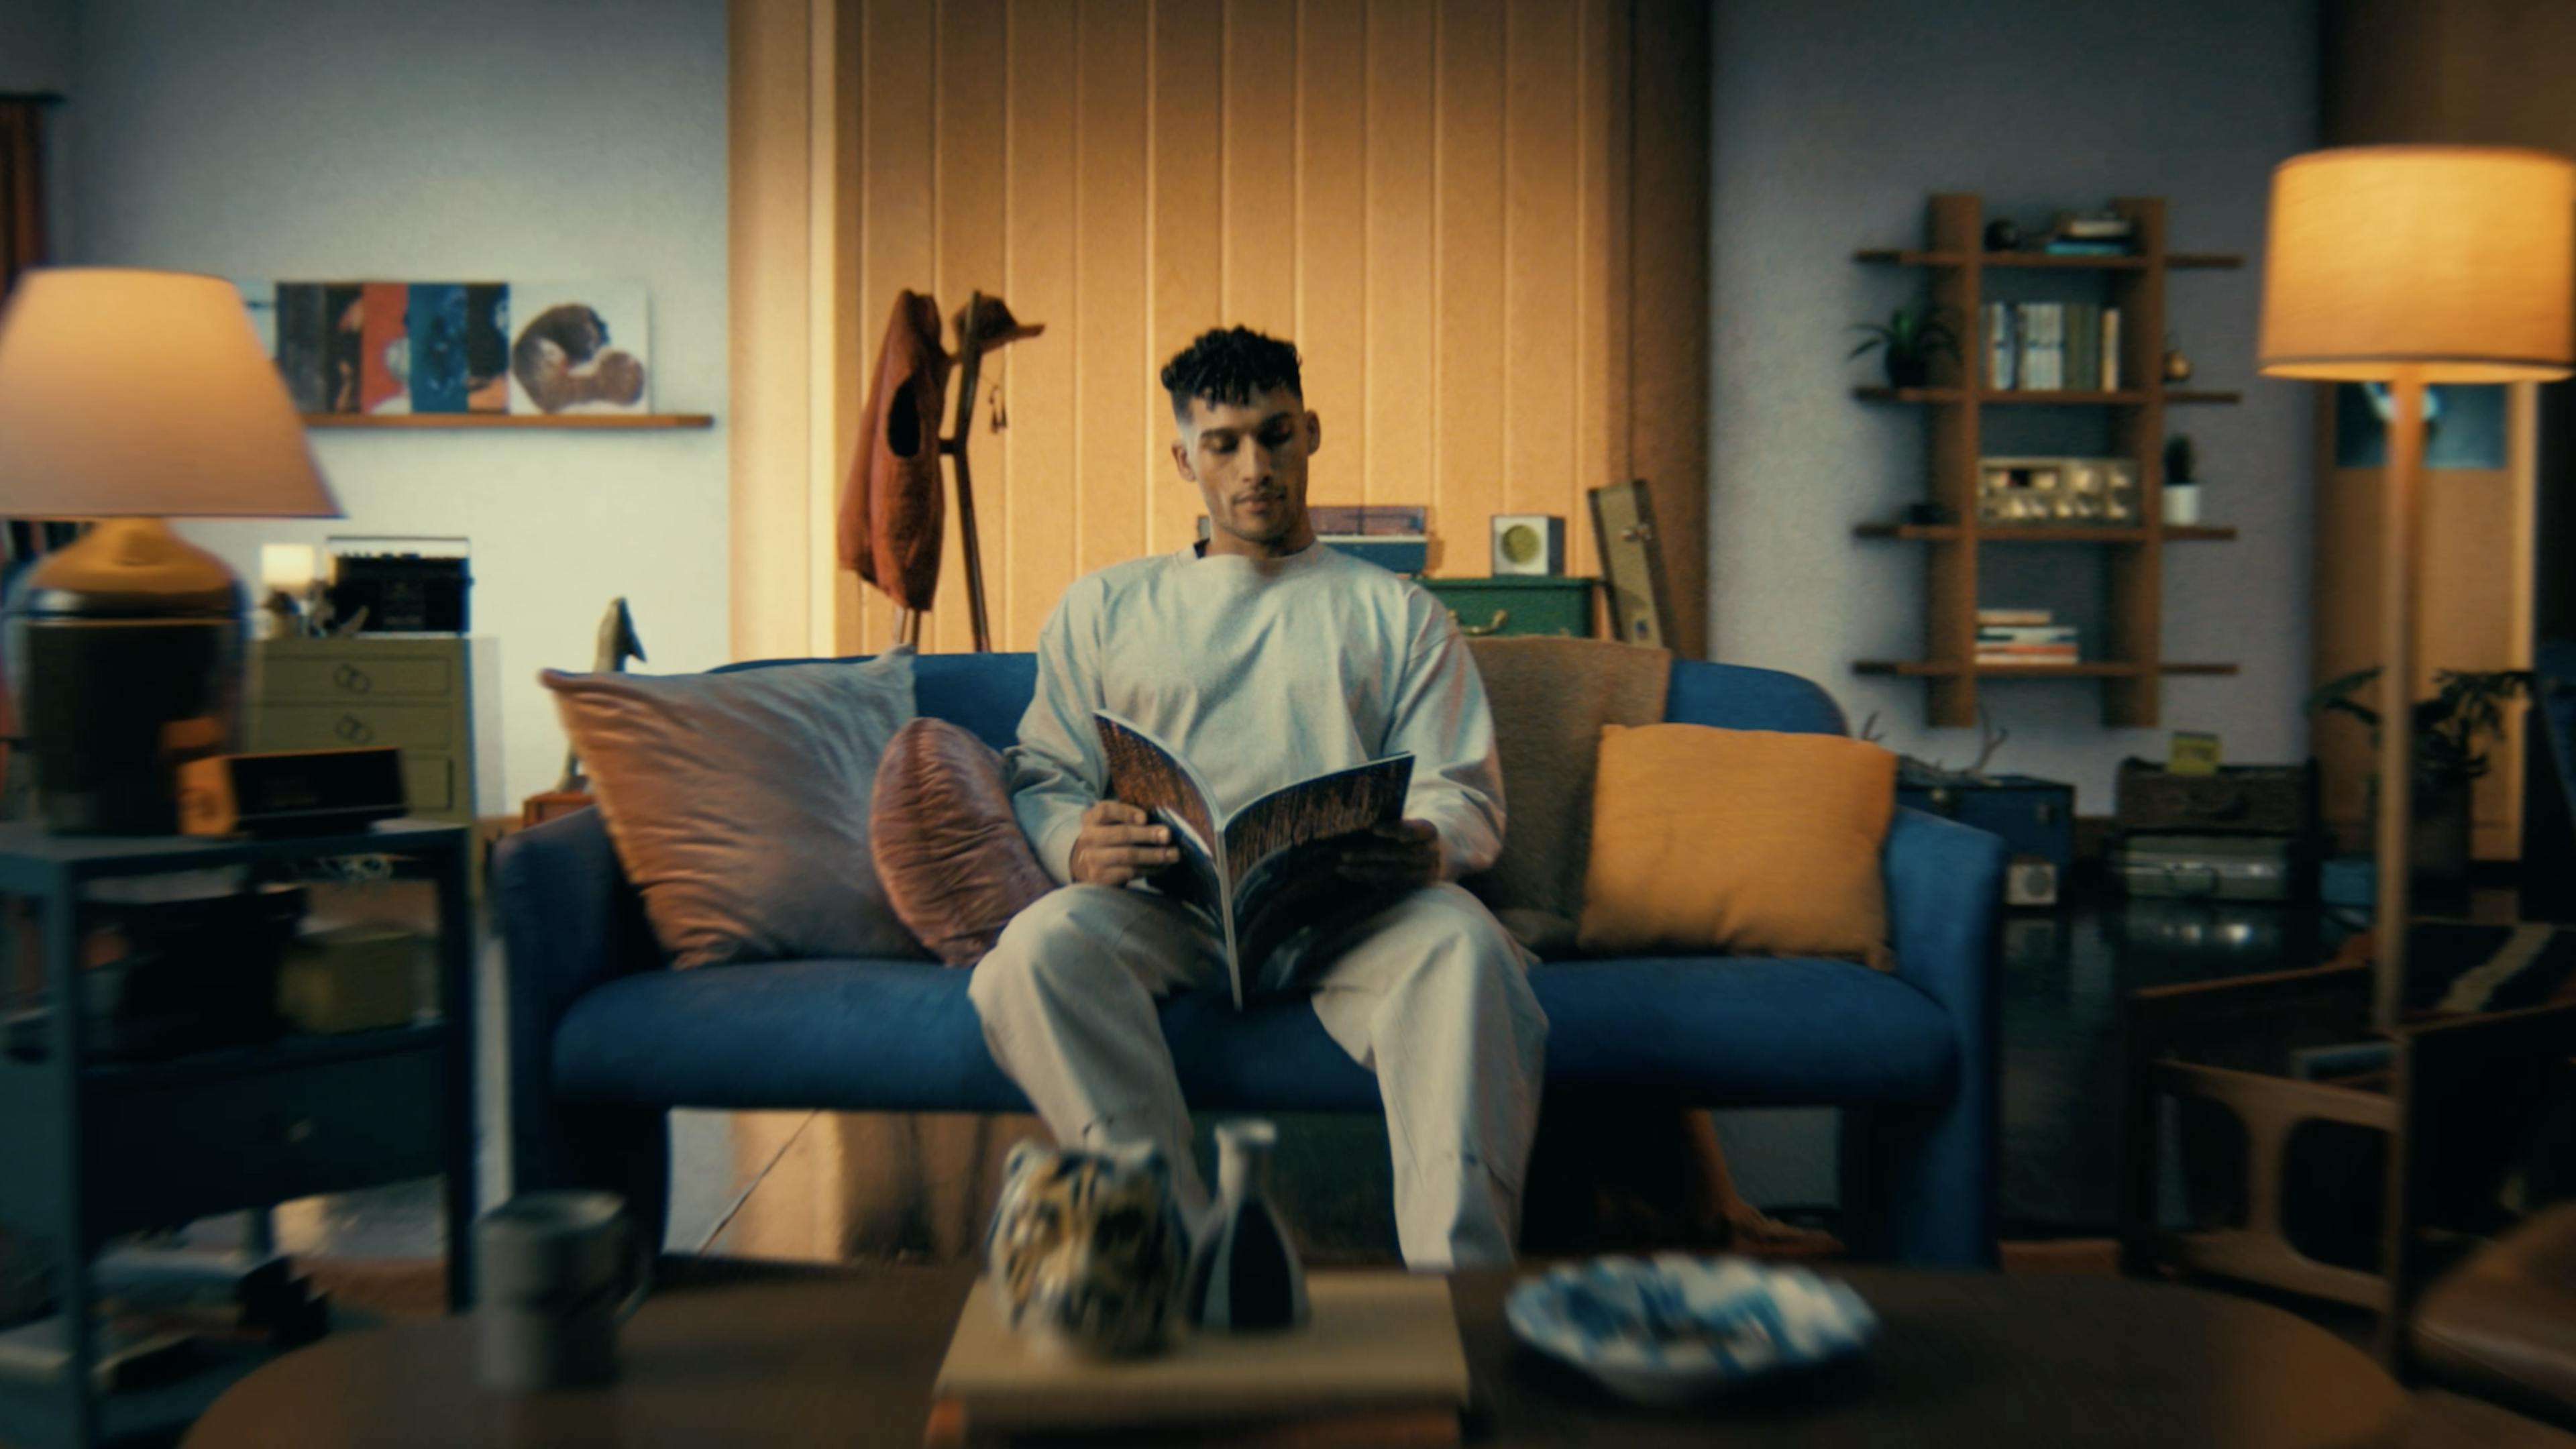 Man reading magazine on a blue sofa in his living room